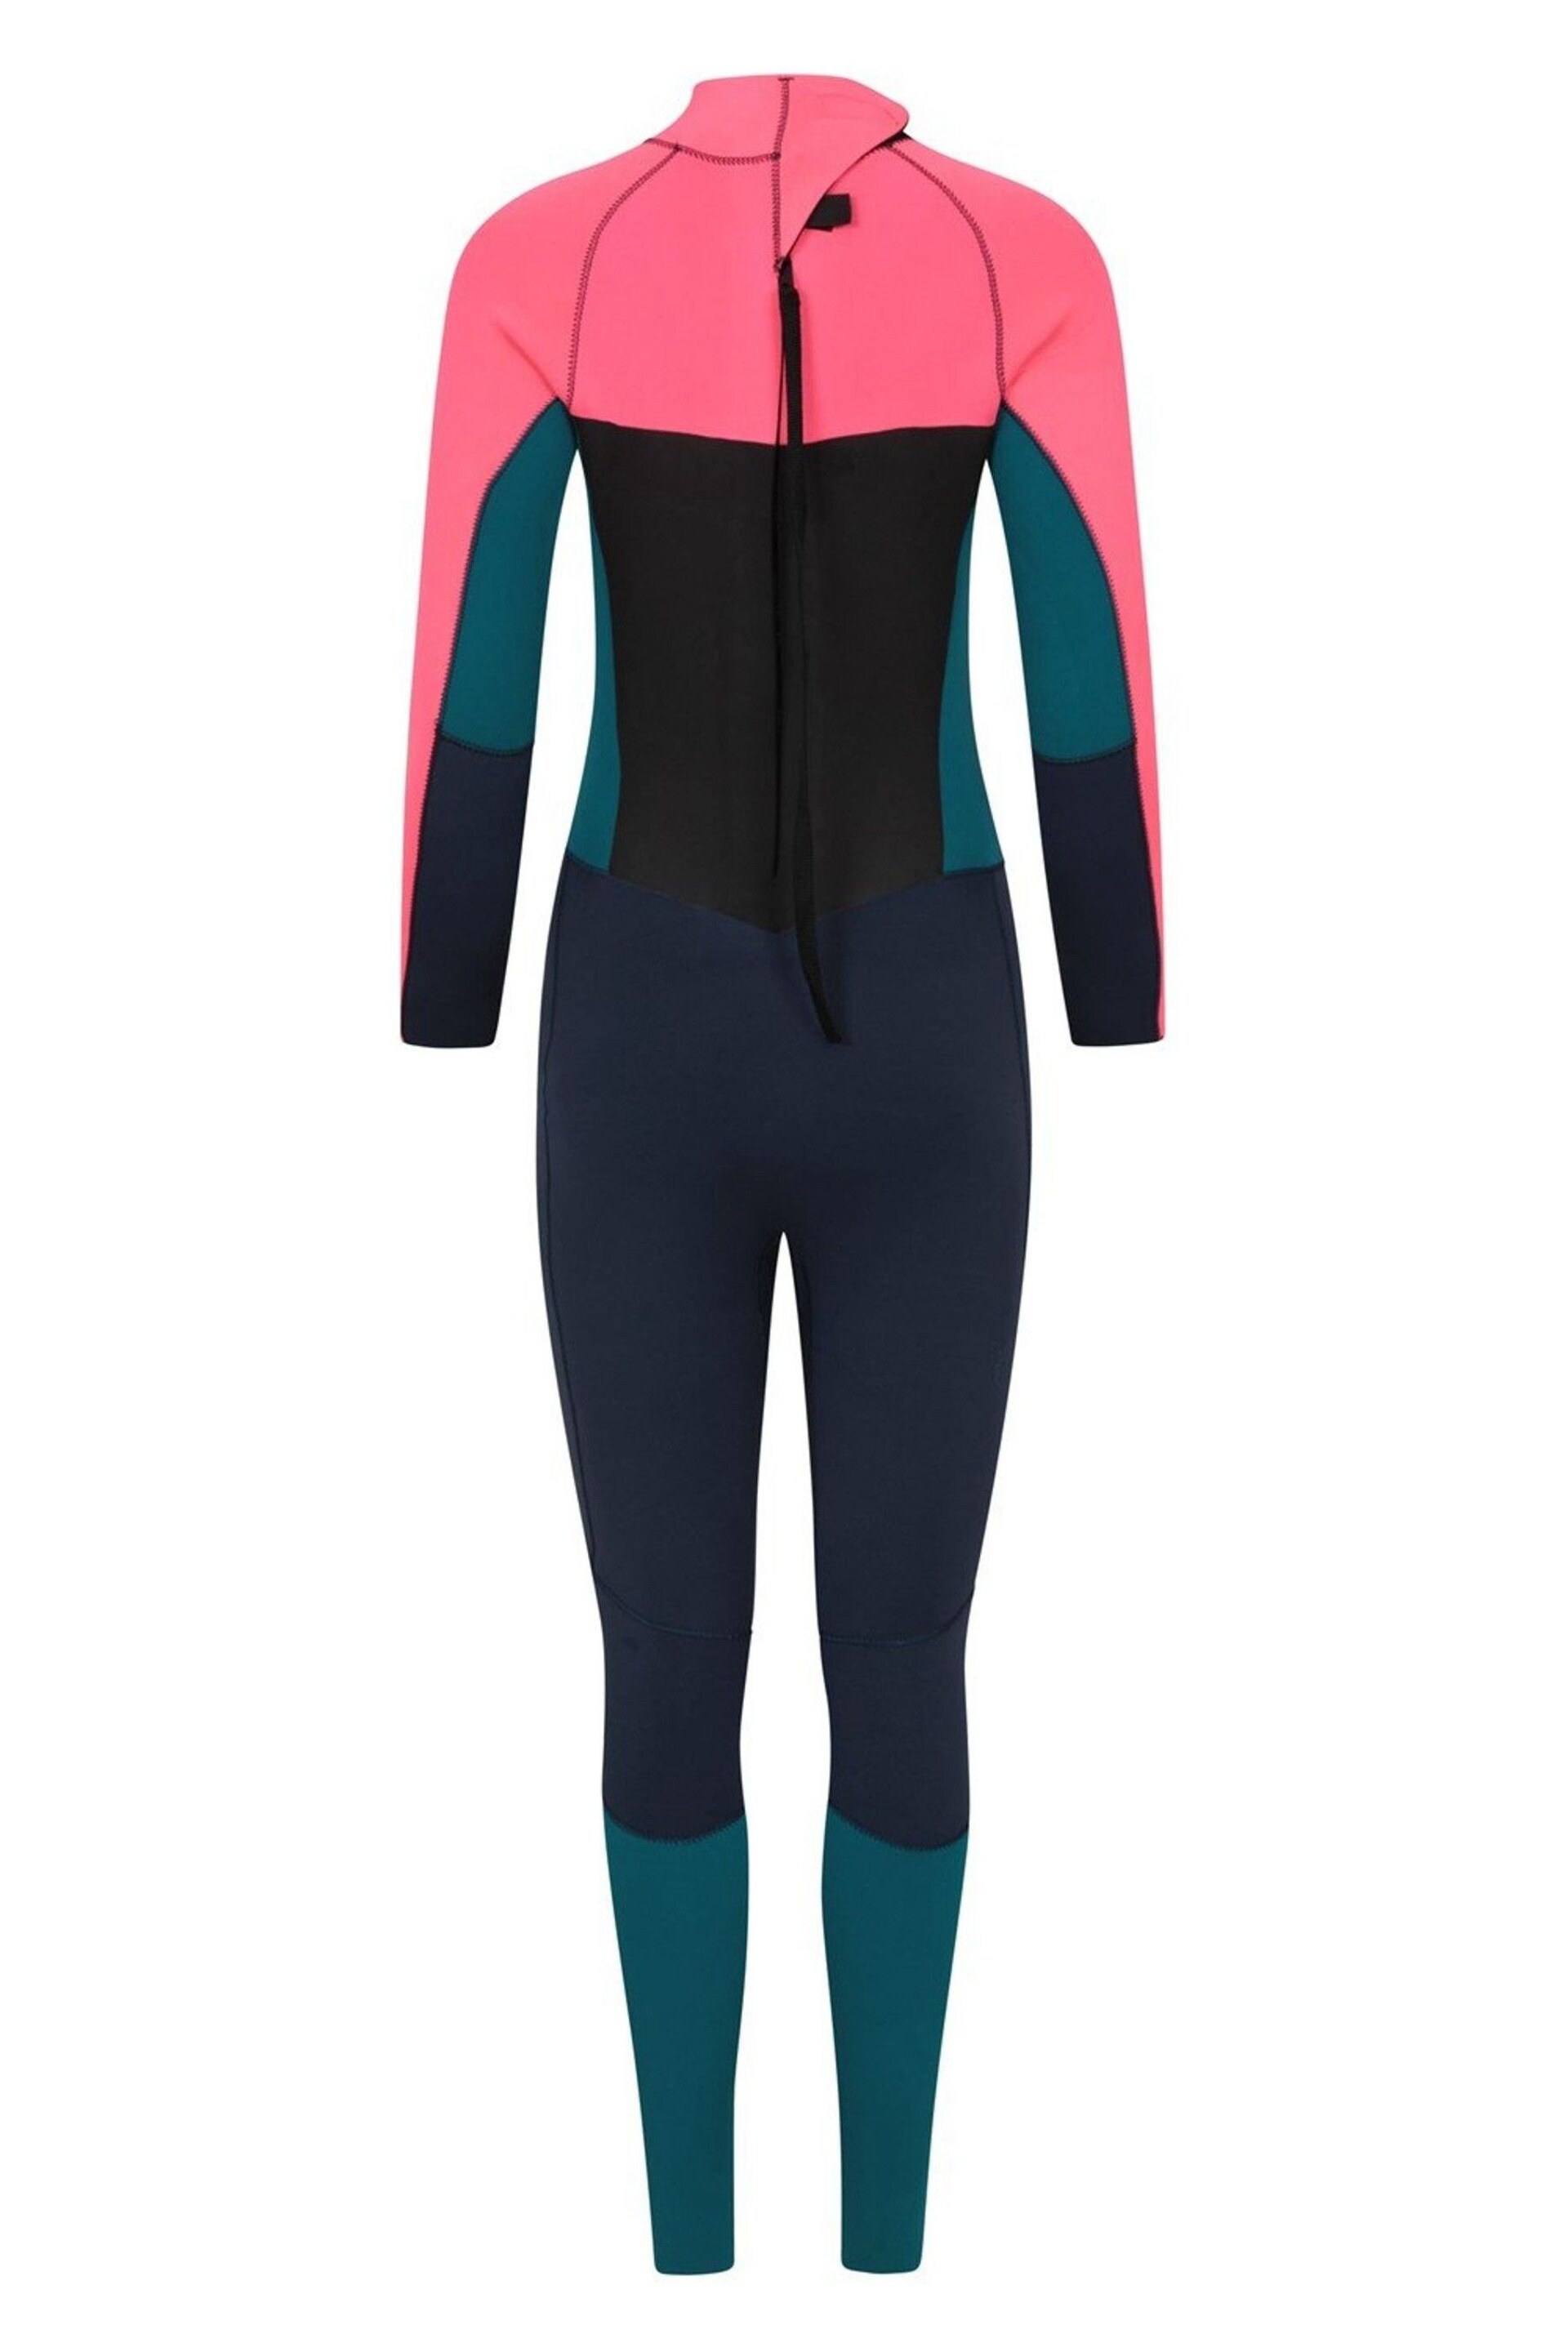 Mountain Warehouse Navy Submerge Womens Full Length 5mm Wetsuit - Image 4 of 4